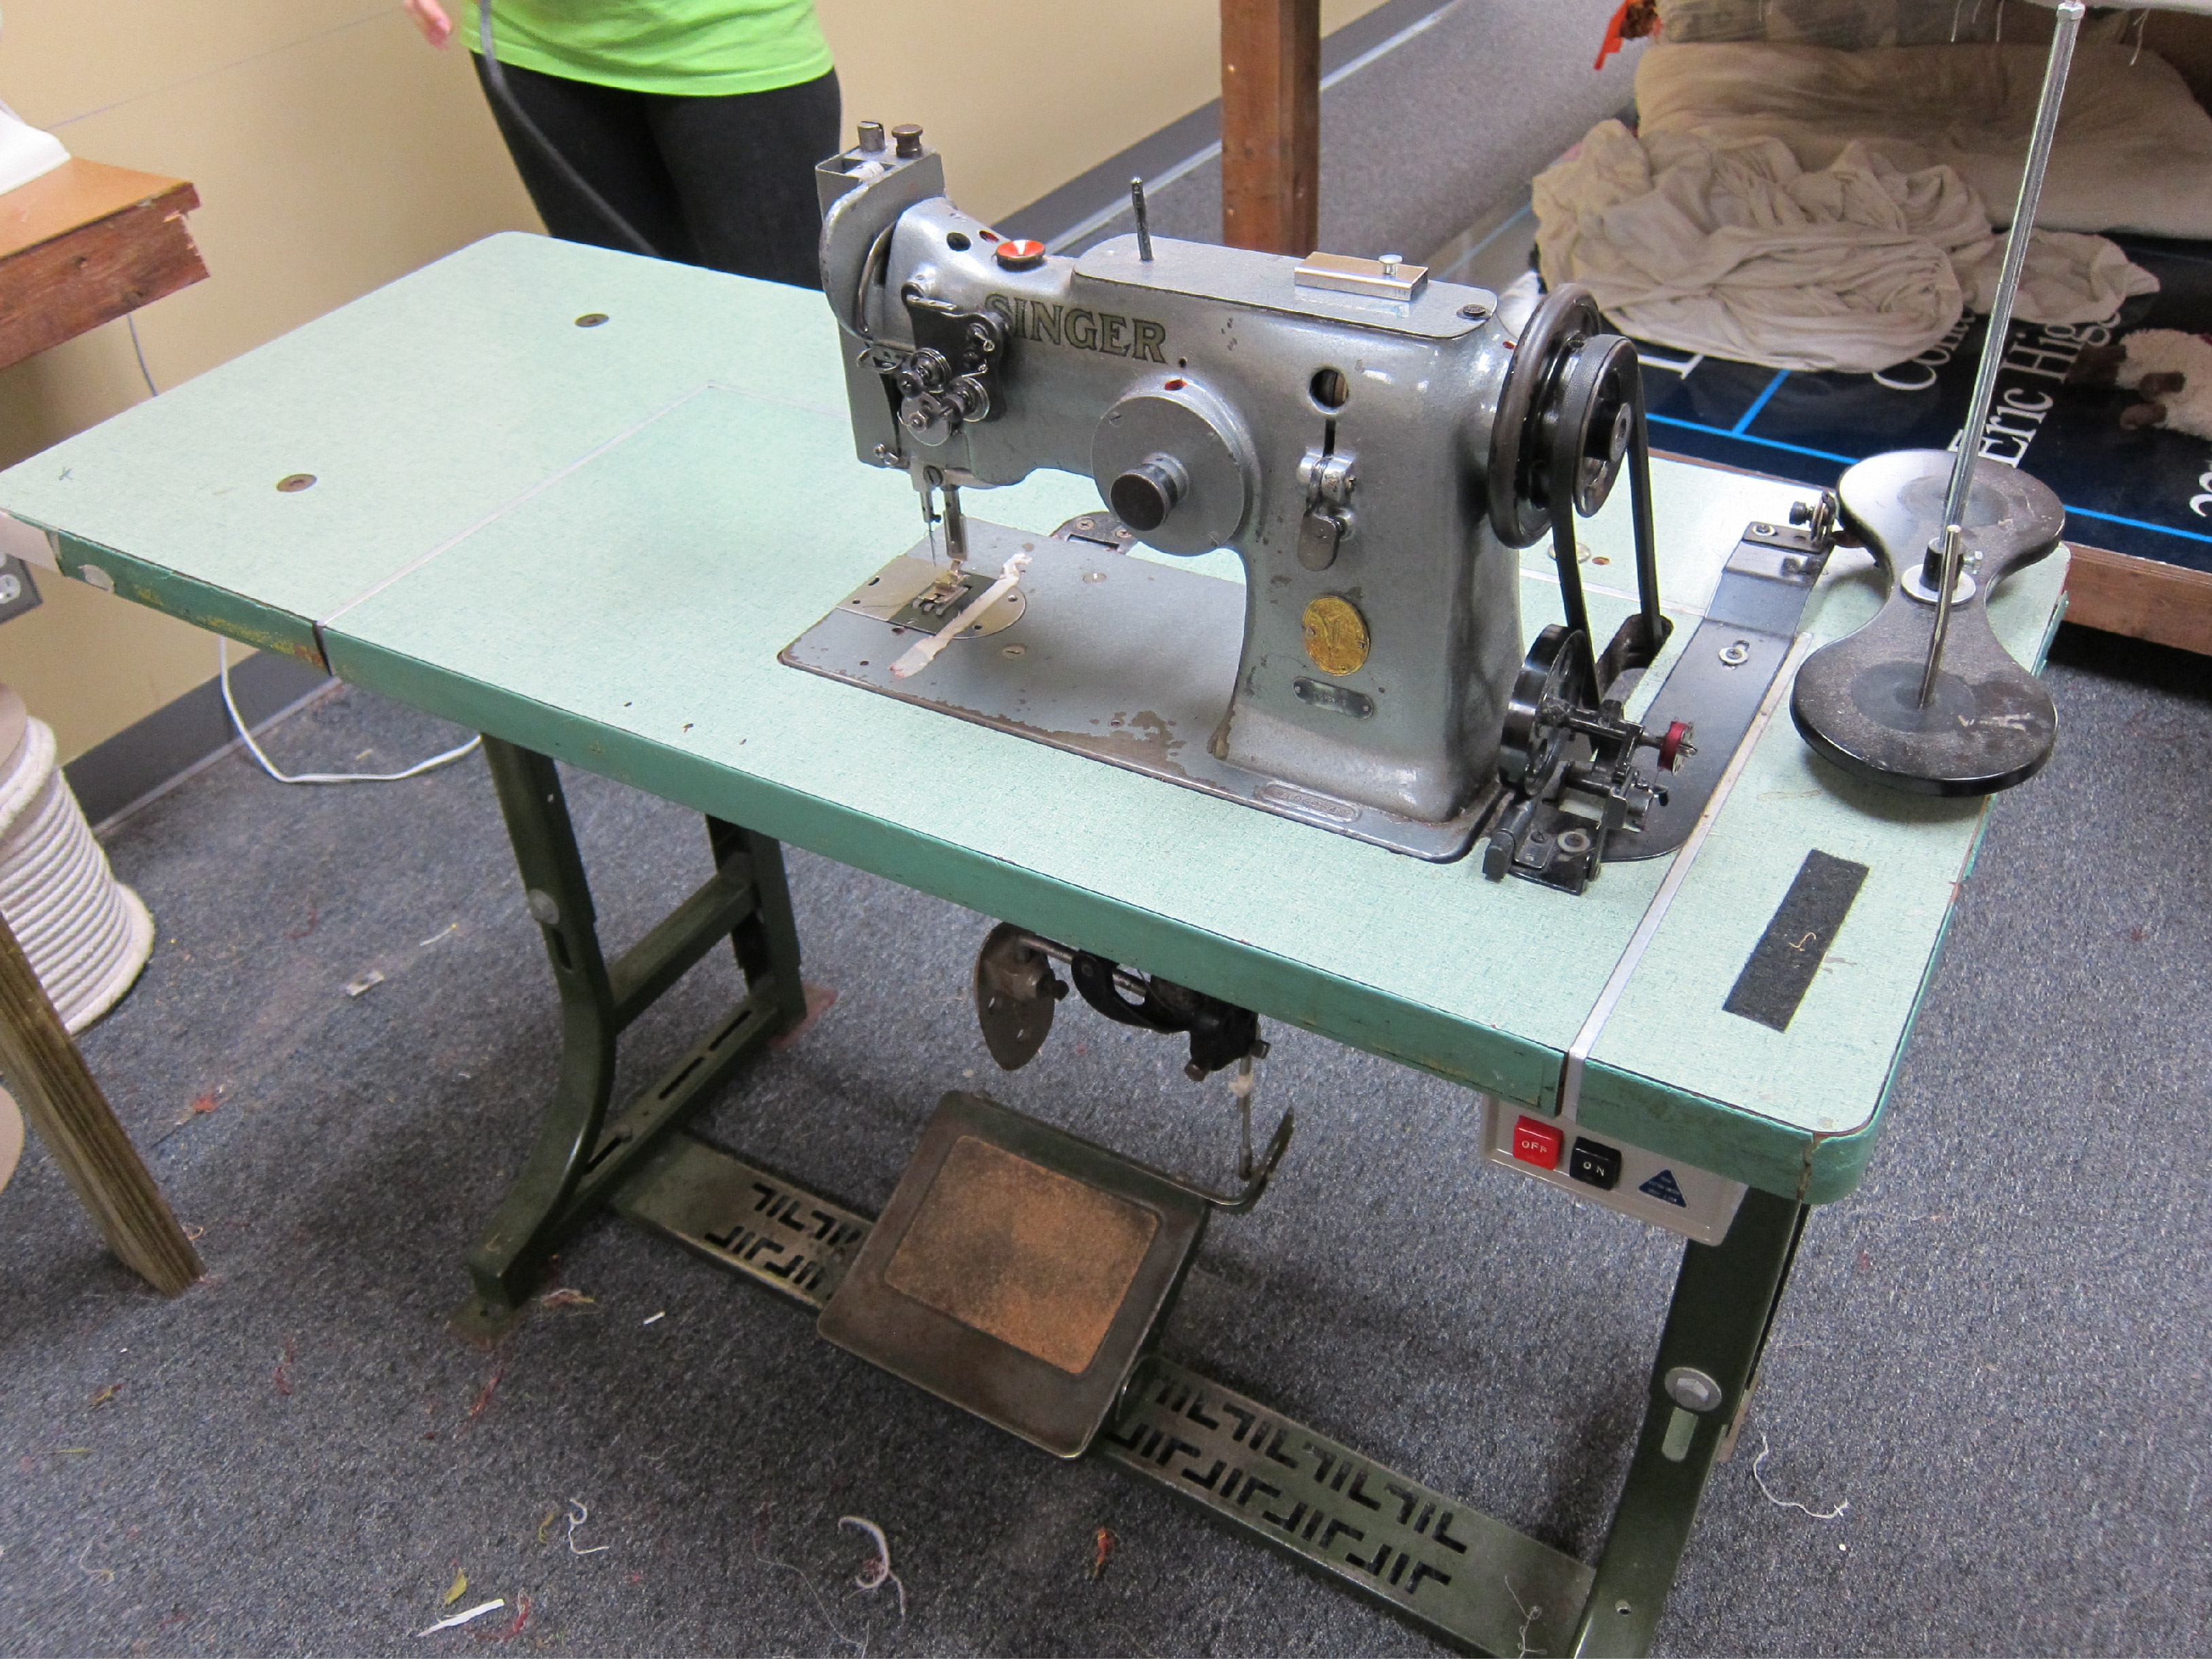 3 industrial sewing machines